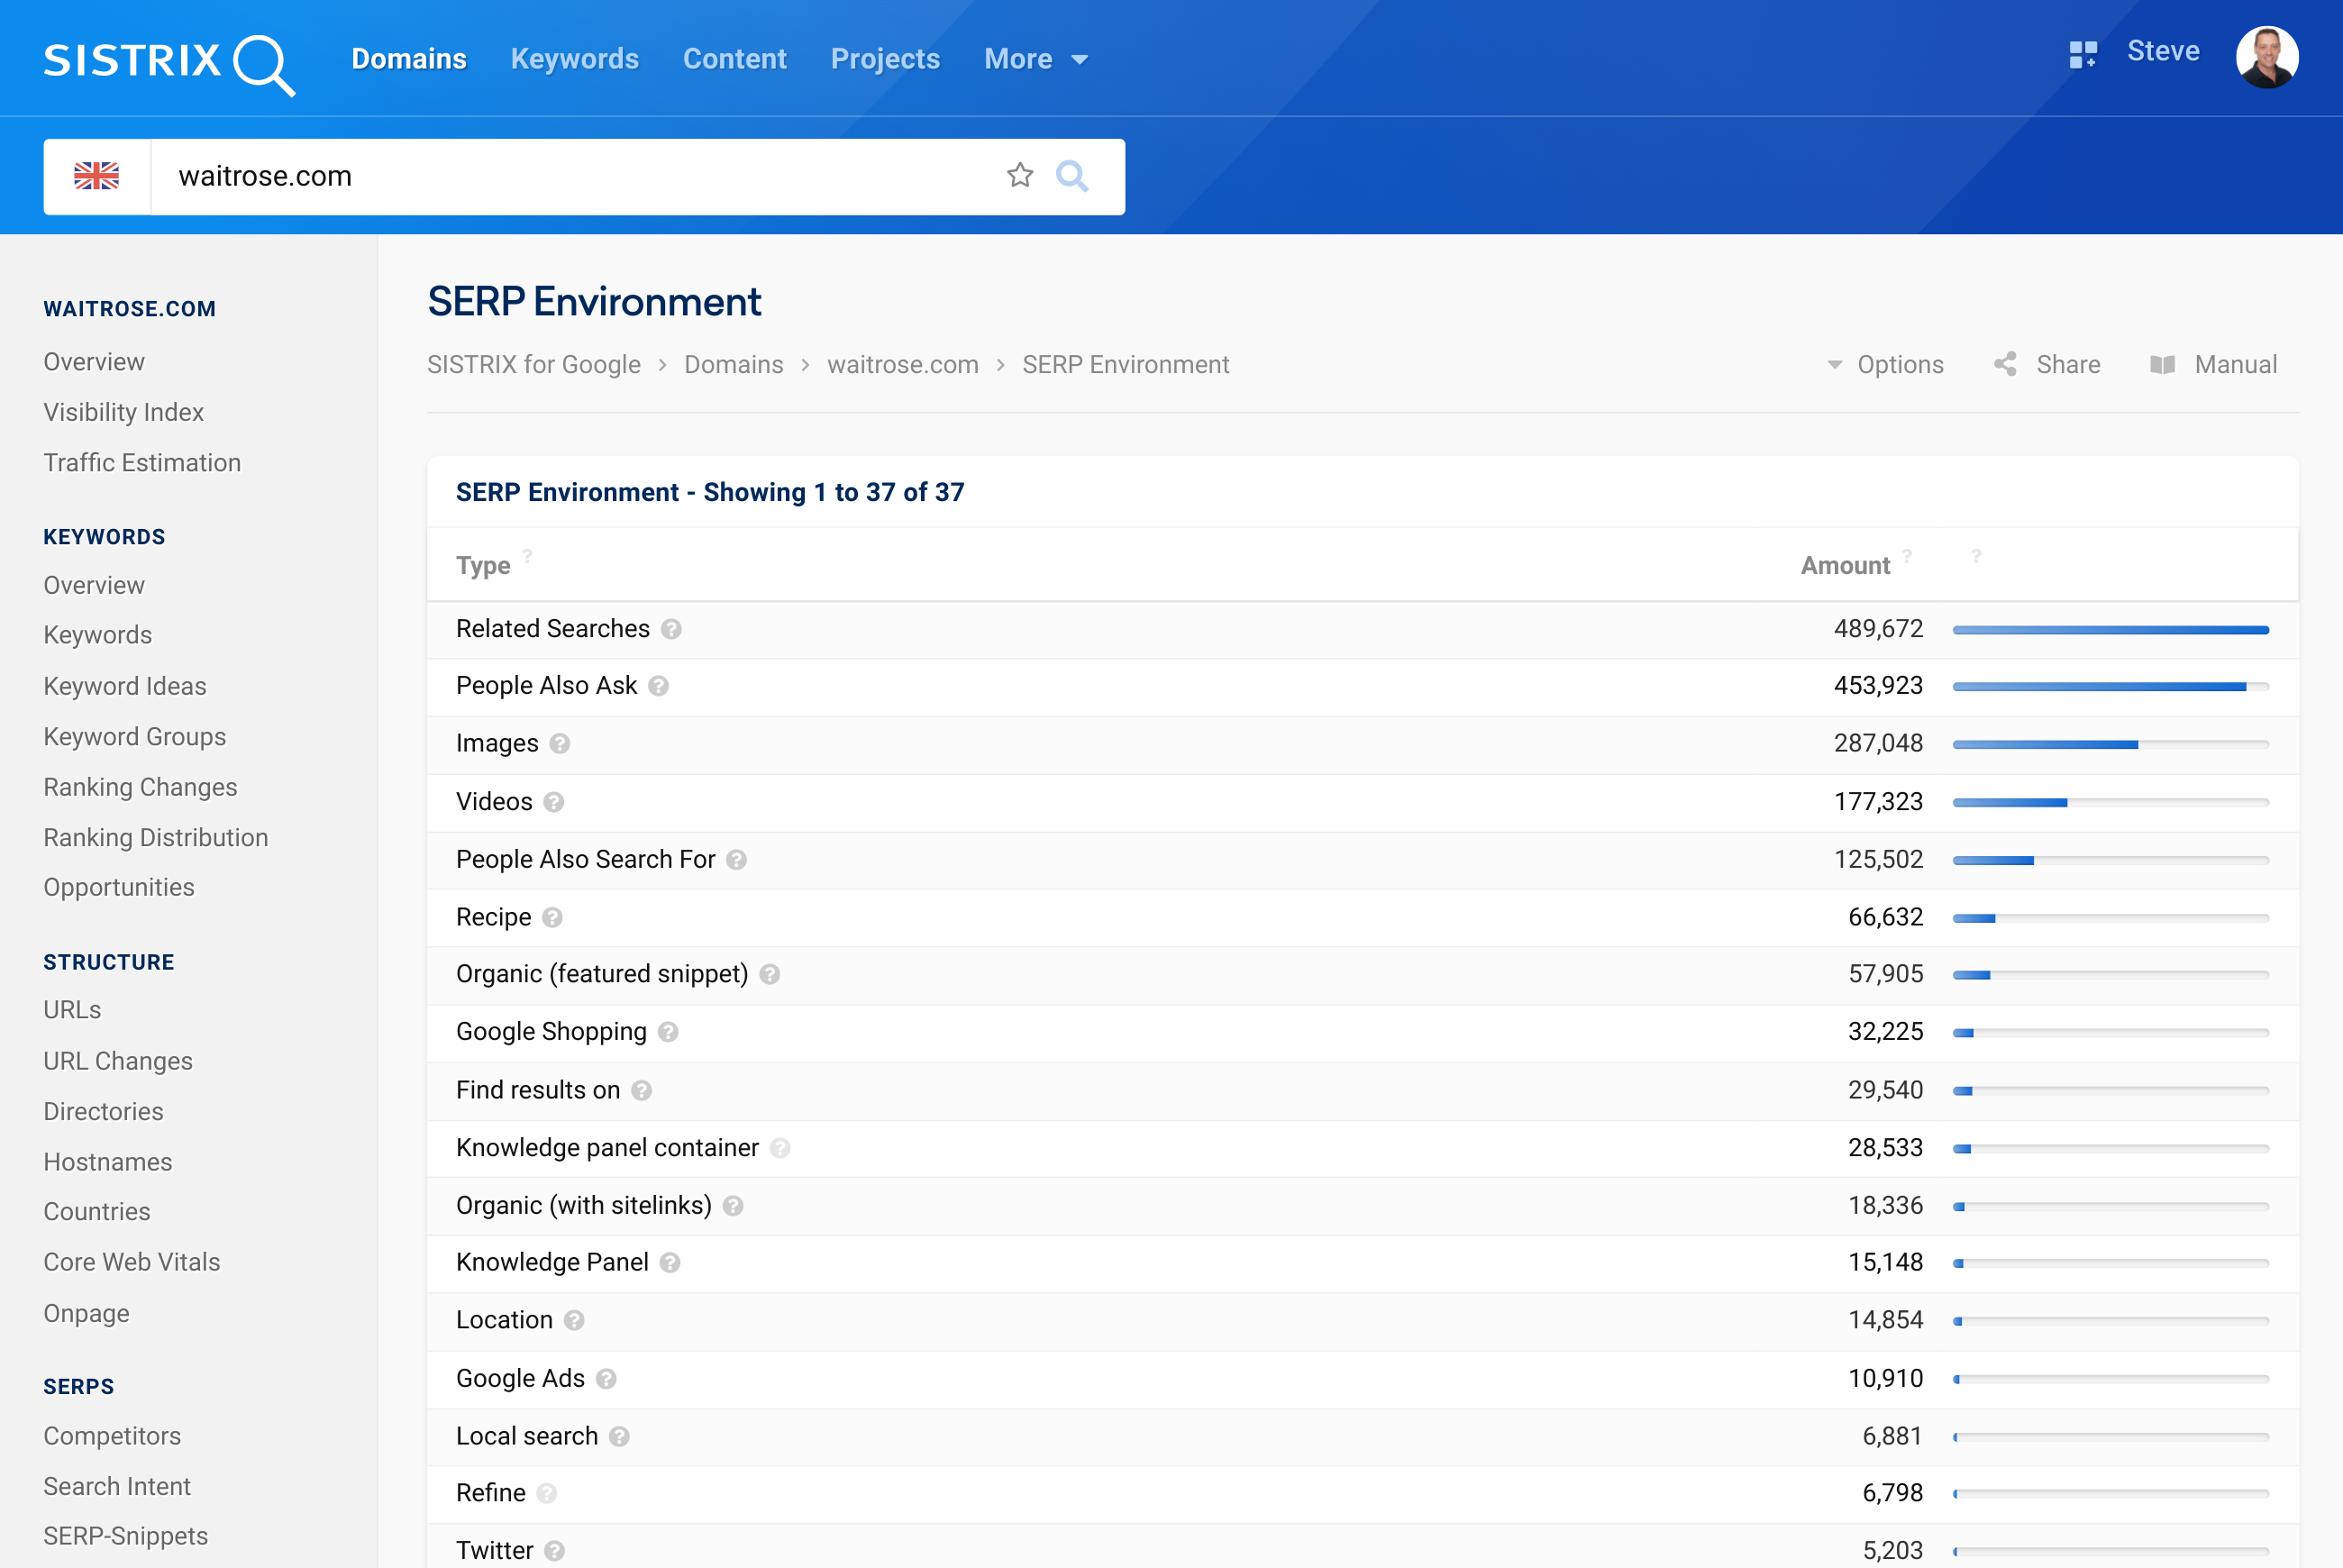 SERP environment and features table